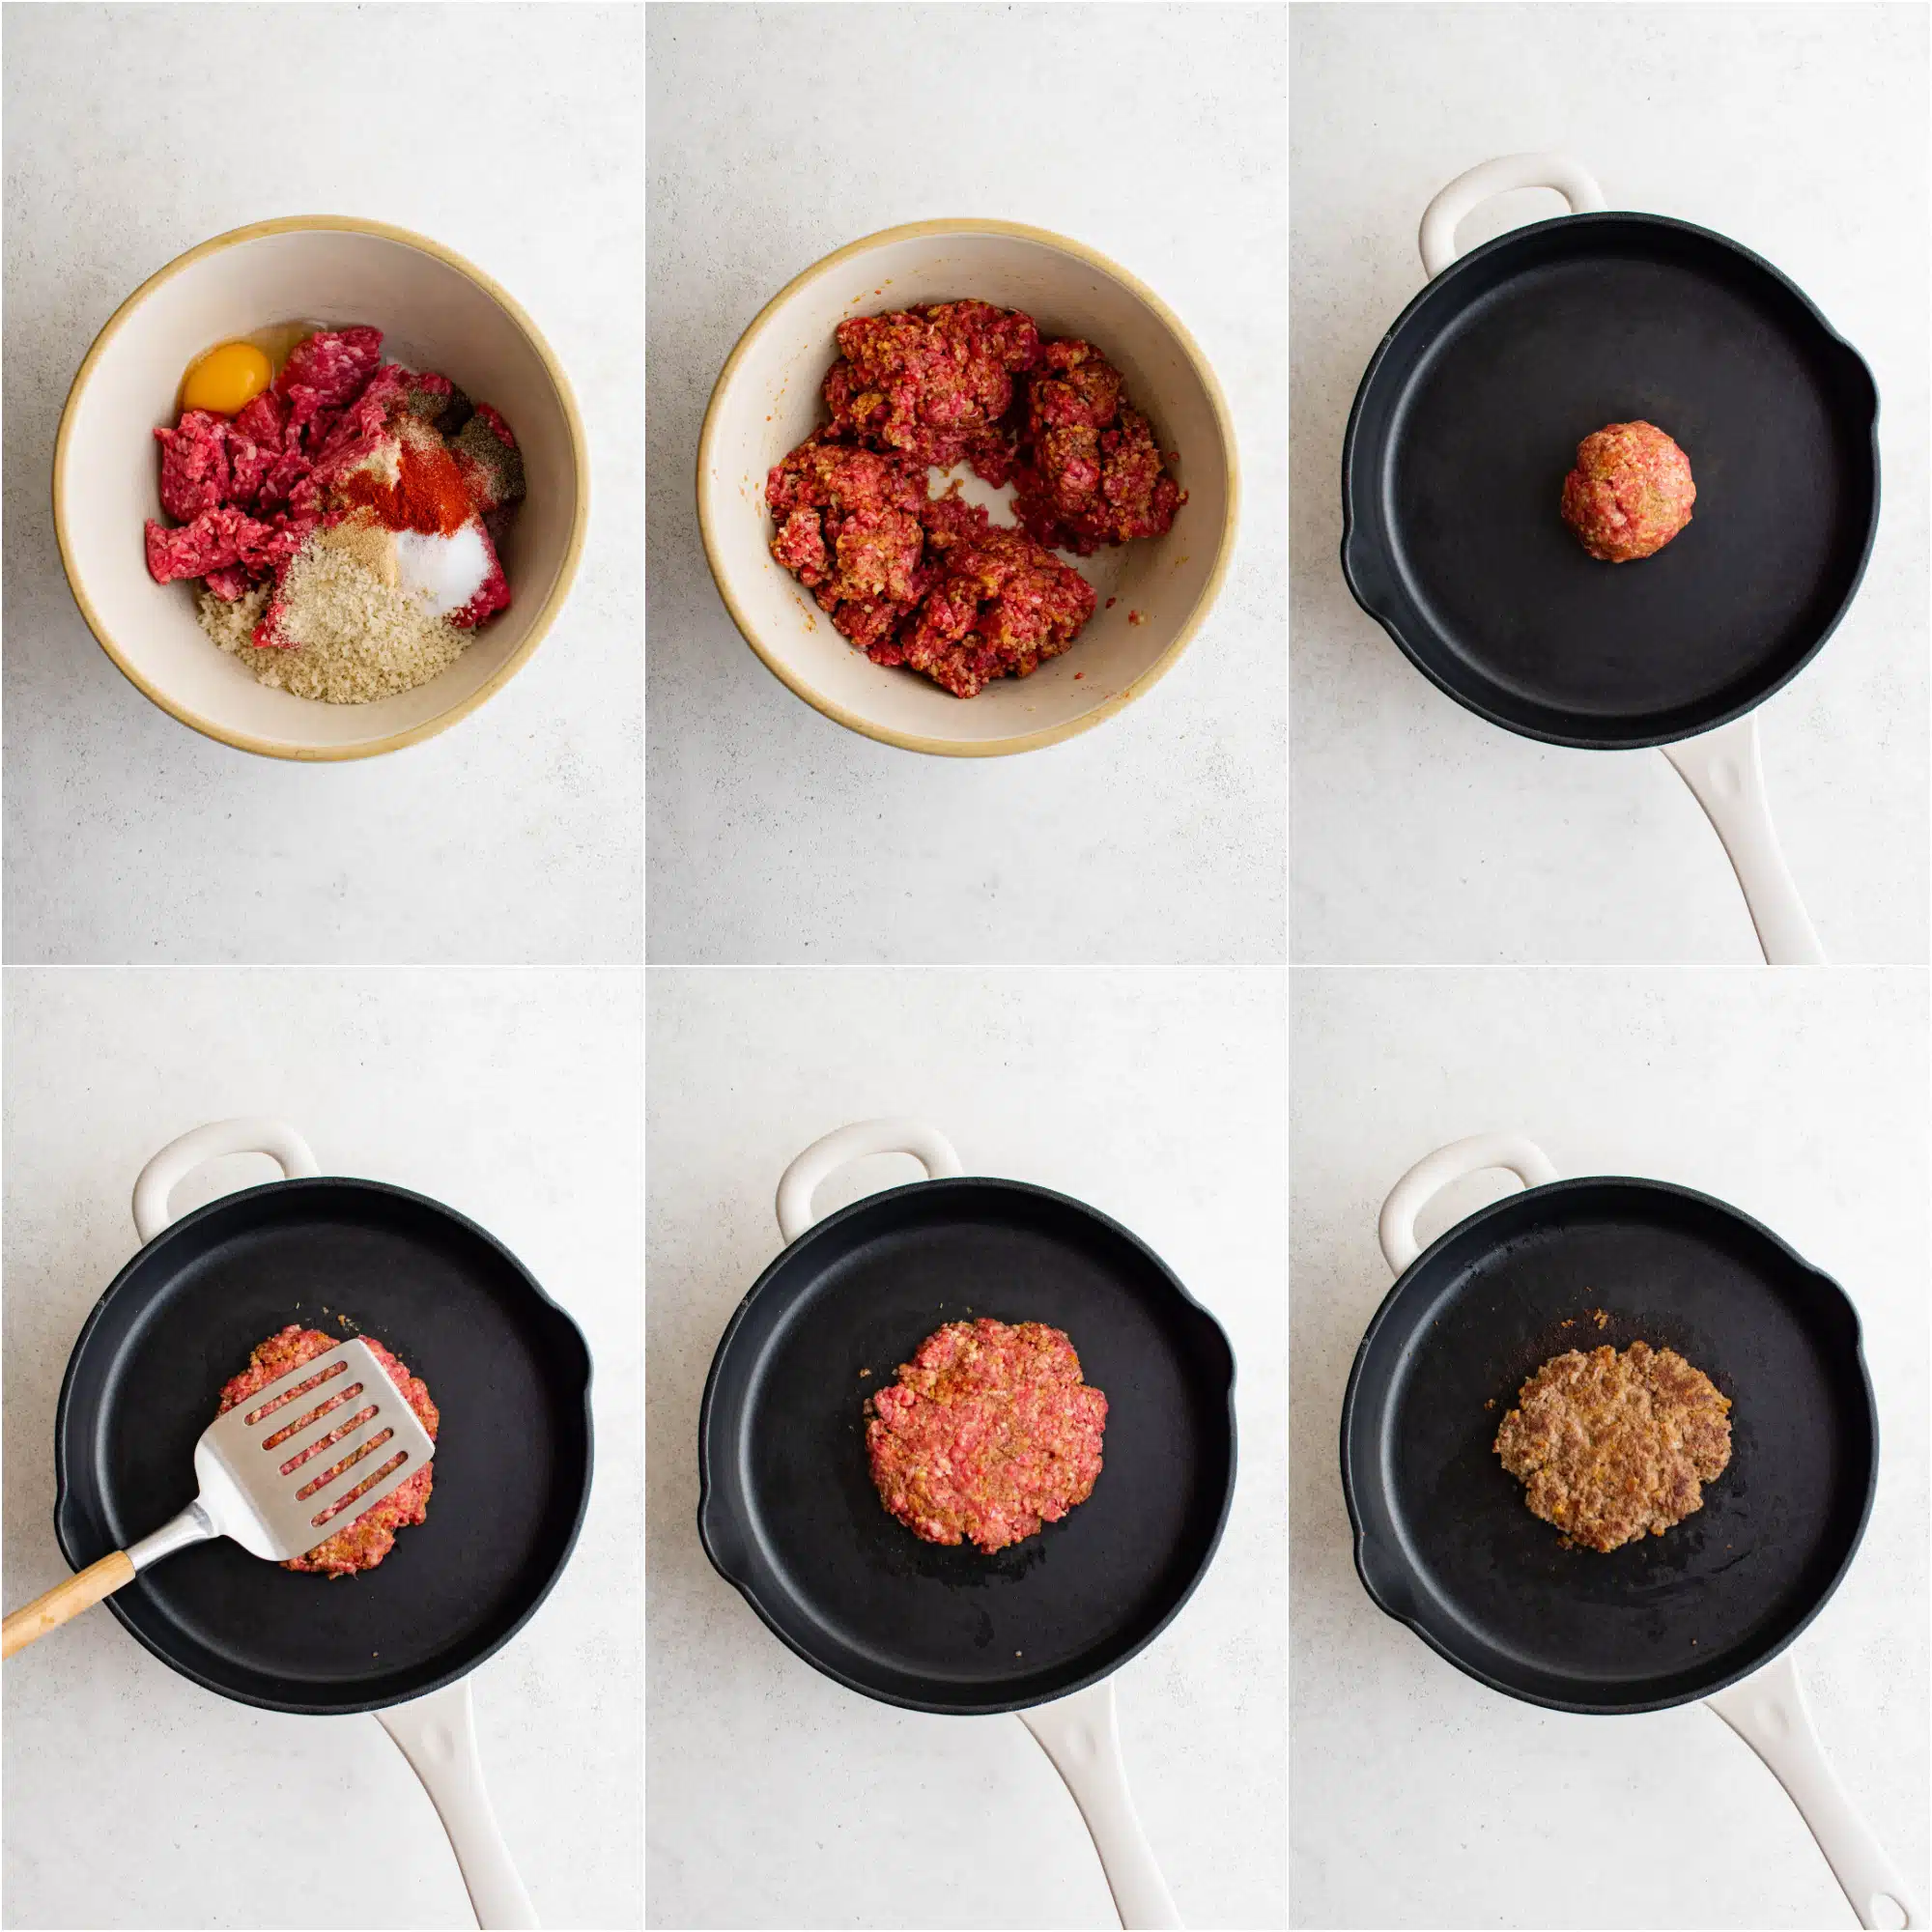 Collage of images showing how to make homemade hamburger patties starting with combining the ground beef with seasoning and panko, dividing it into four, and cooking it on a large cast iron pan until cooked through.